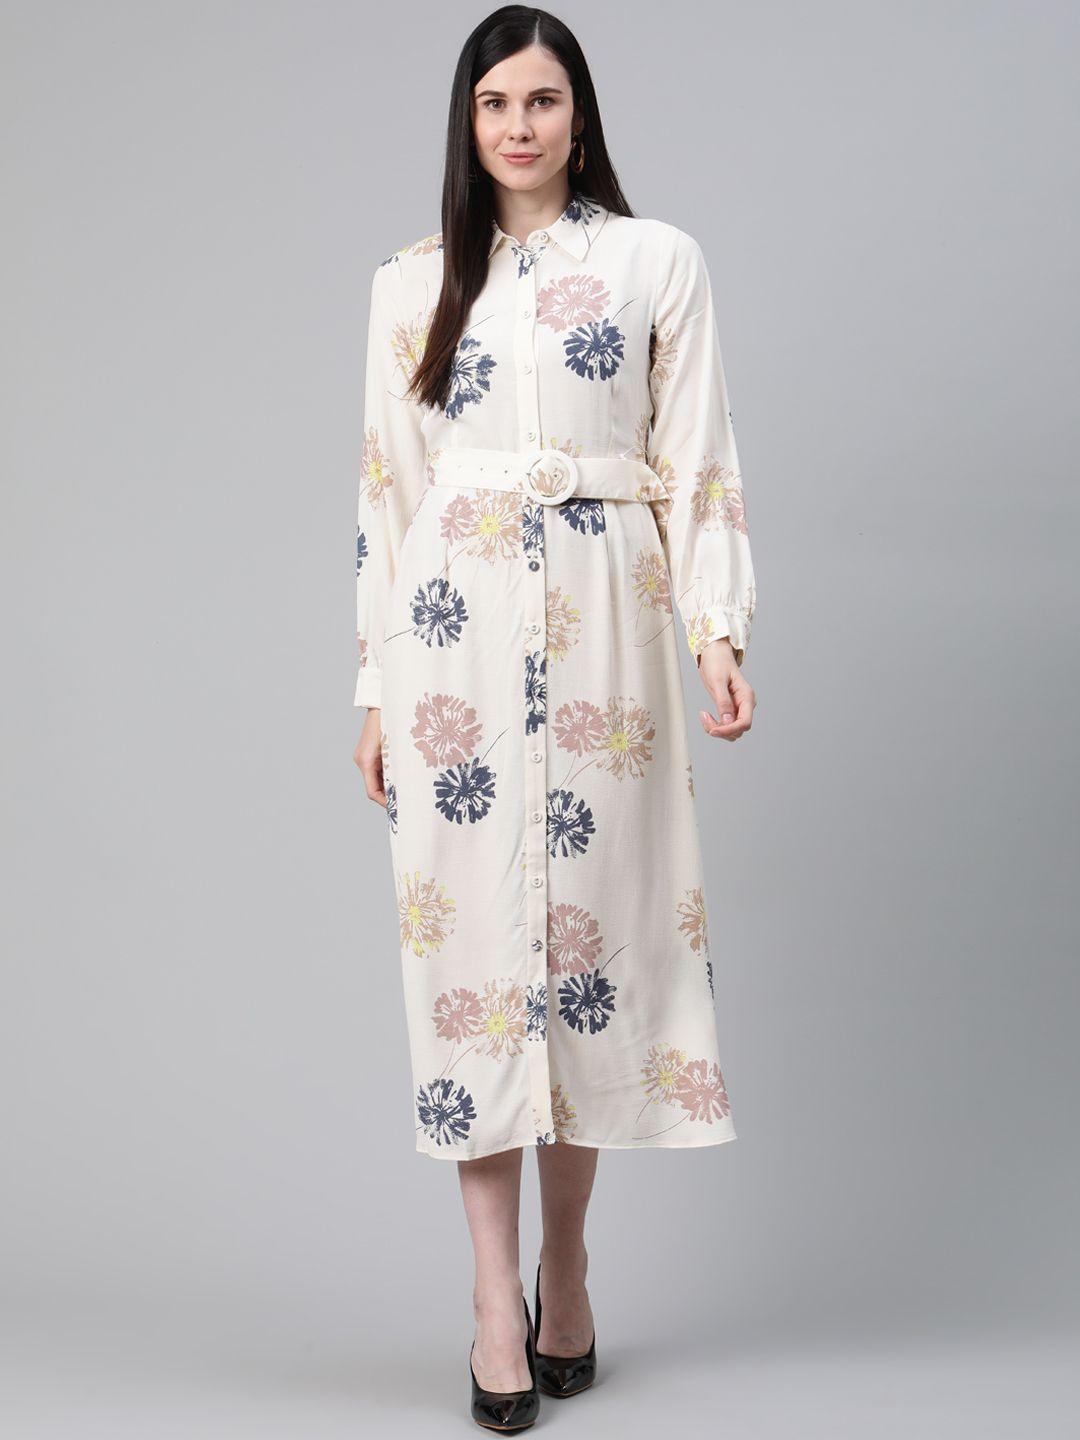 marks & spencer women sustainable off-white floral print shirt dress